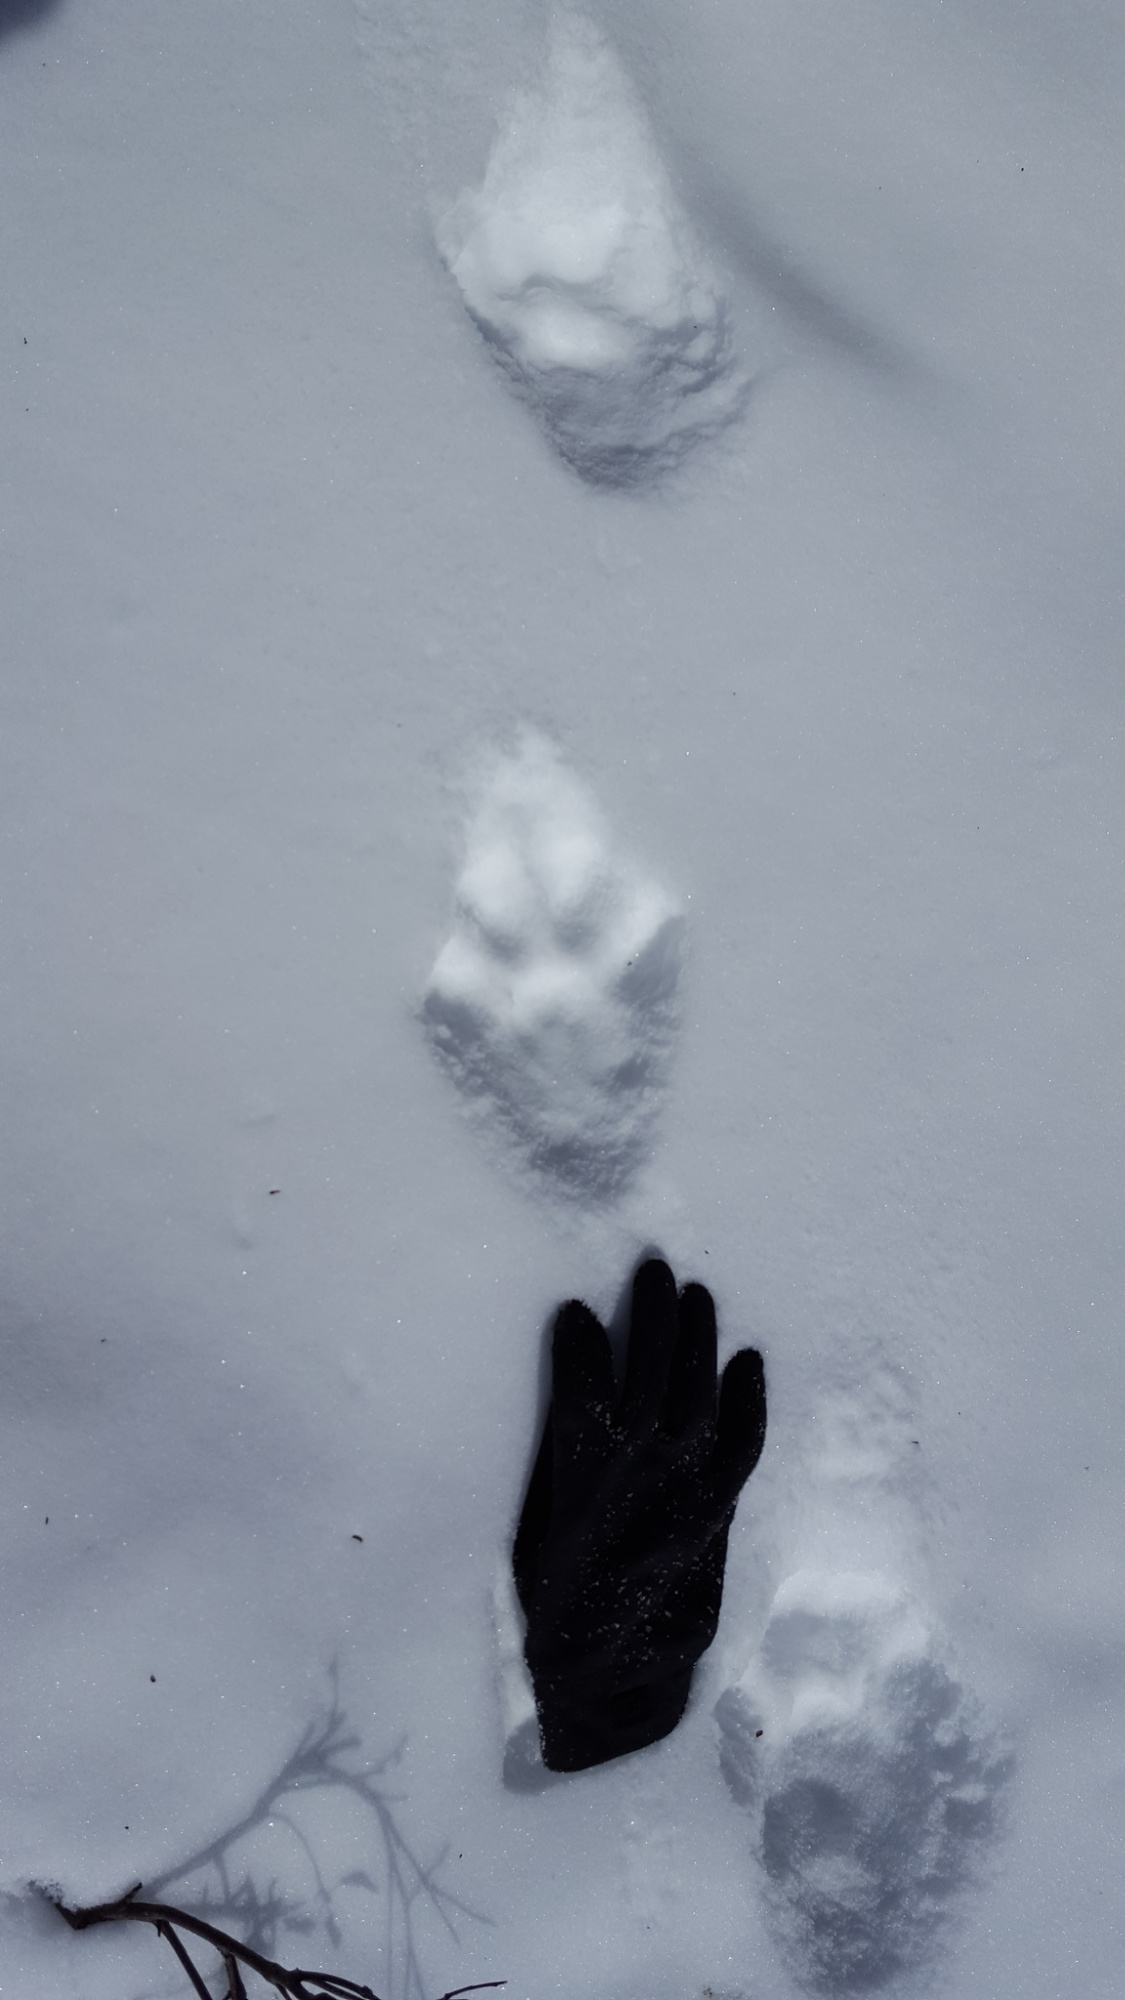 A set of lynx tracks walk through snow with a glove for scale.